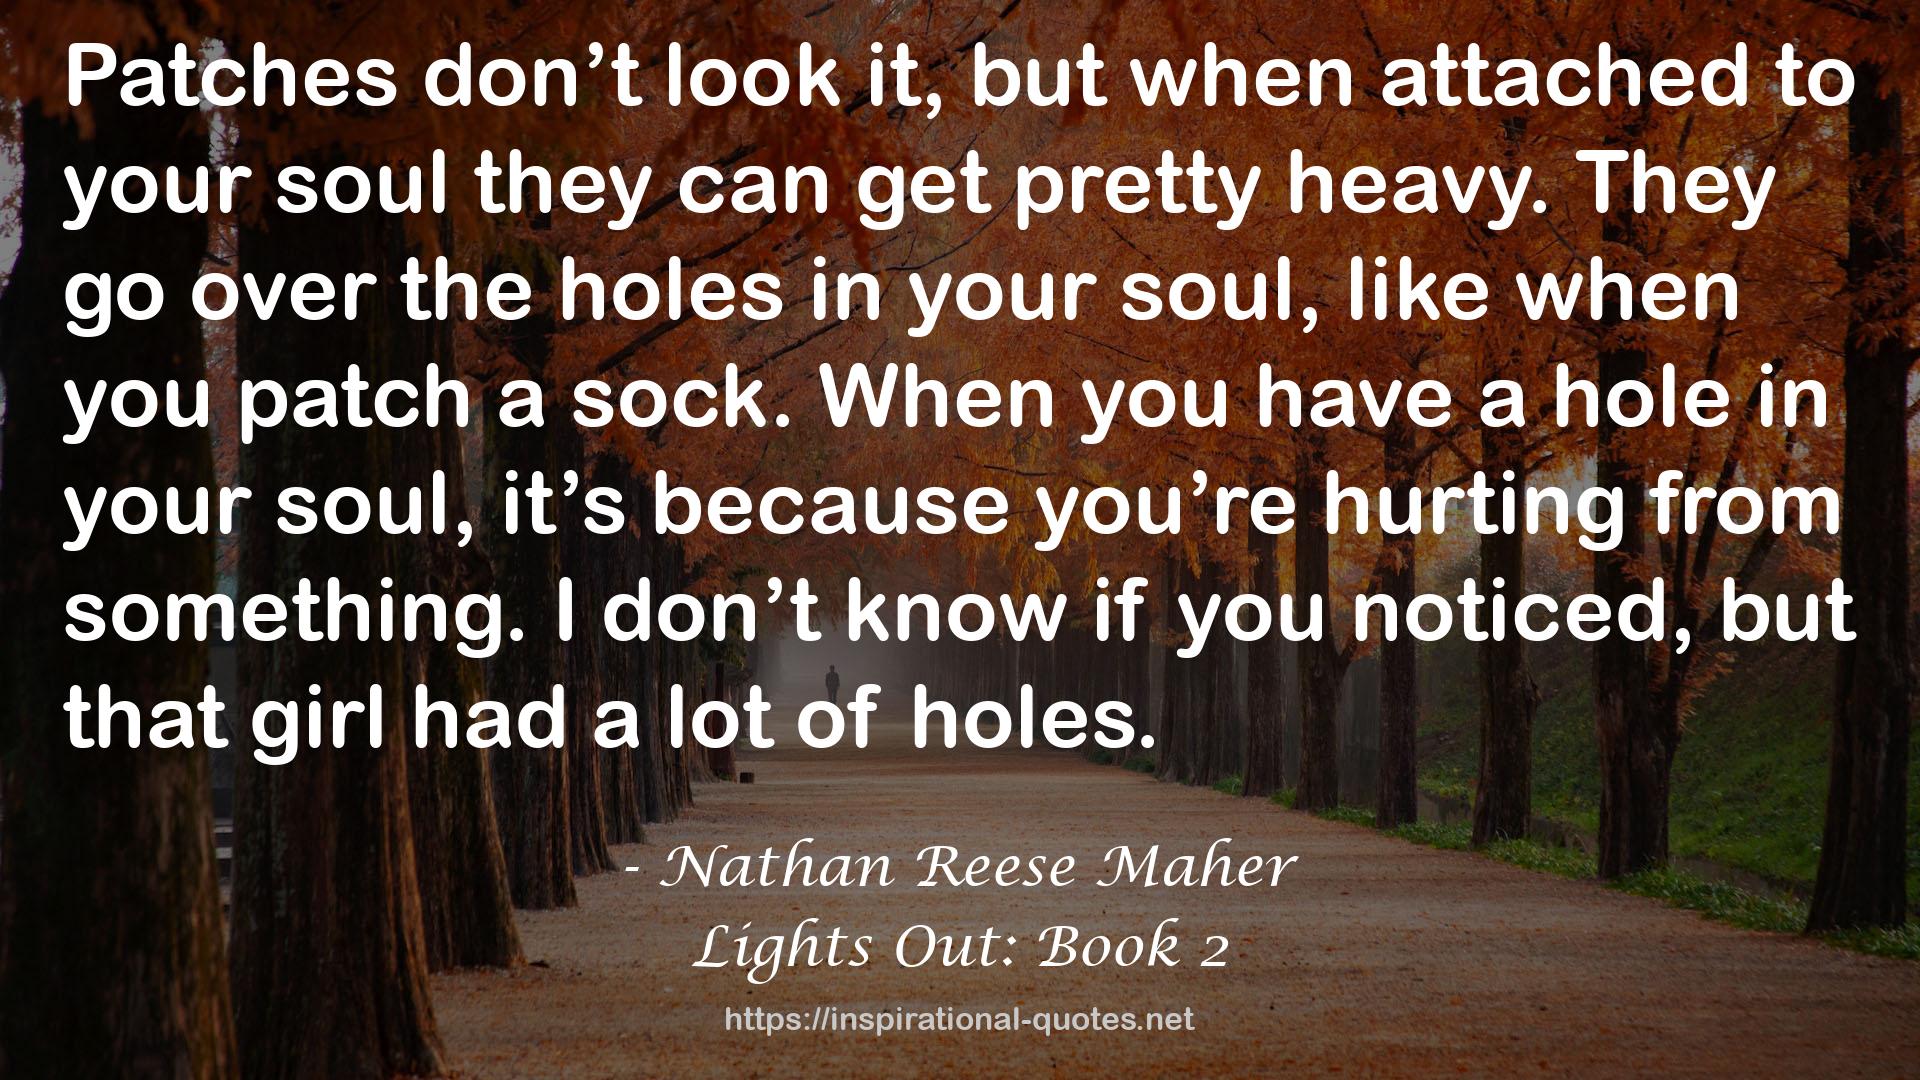 Lights Out: Book 2 QUOTES